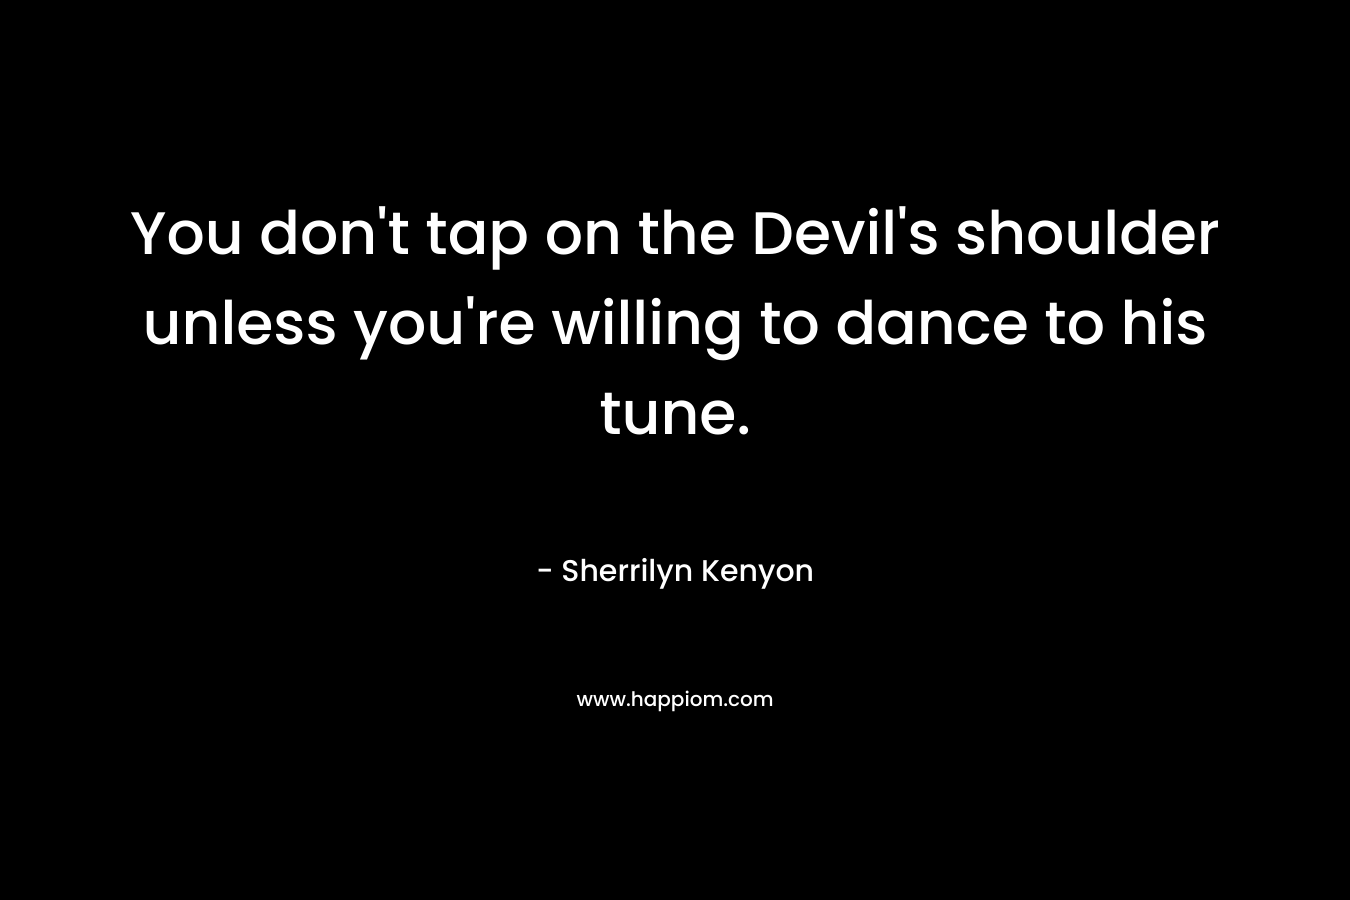 You don’t tap on the Devil’s shoulder unless you’re willing to dance to his tune. – Sherrilyn Kenyon